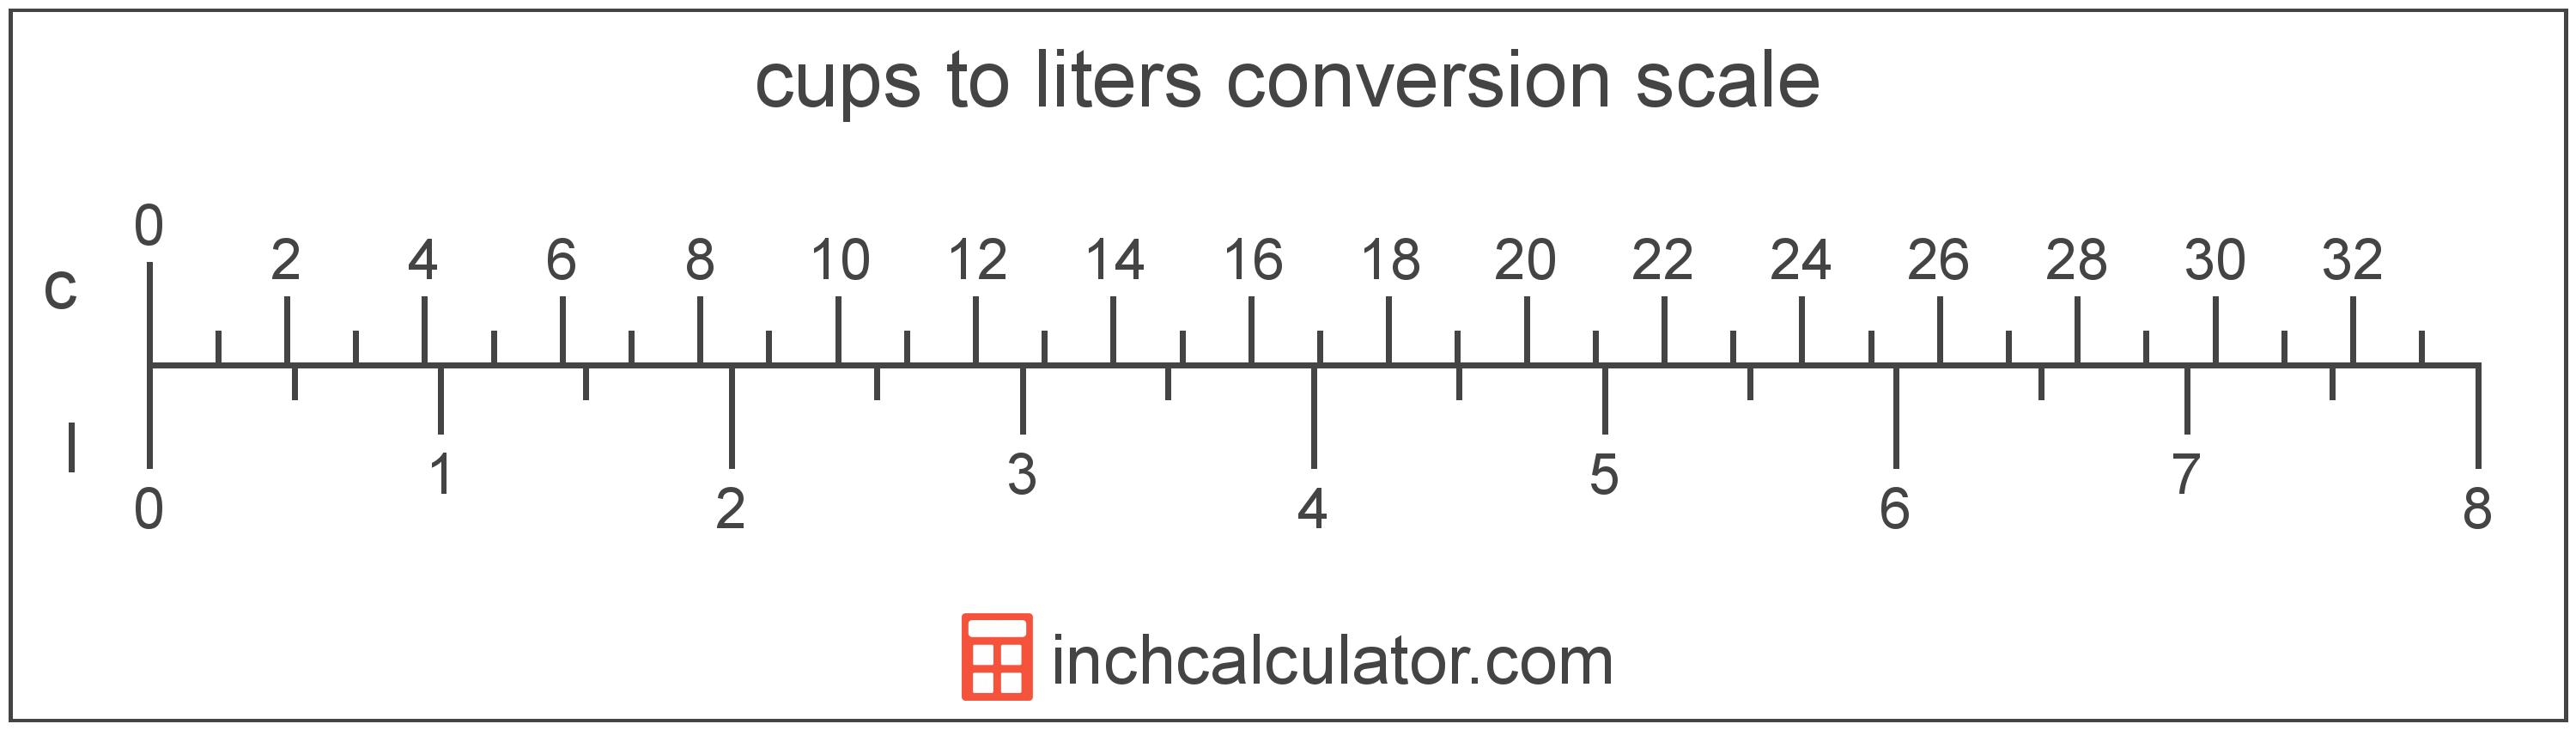 conversion scale showing cups and equivalent liters volume values